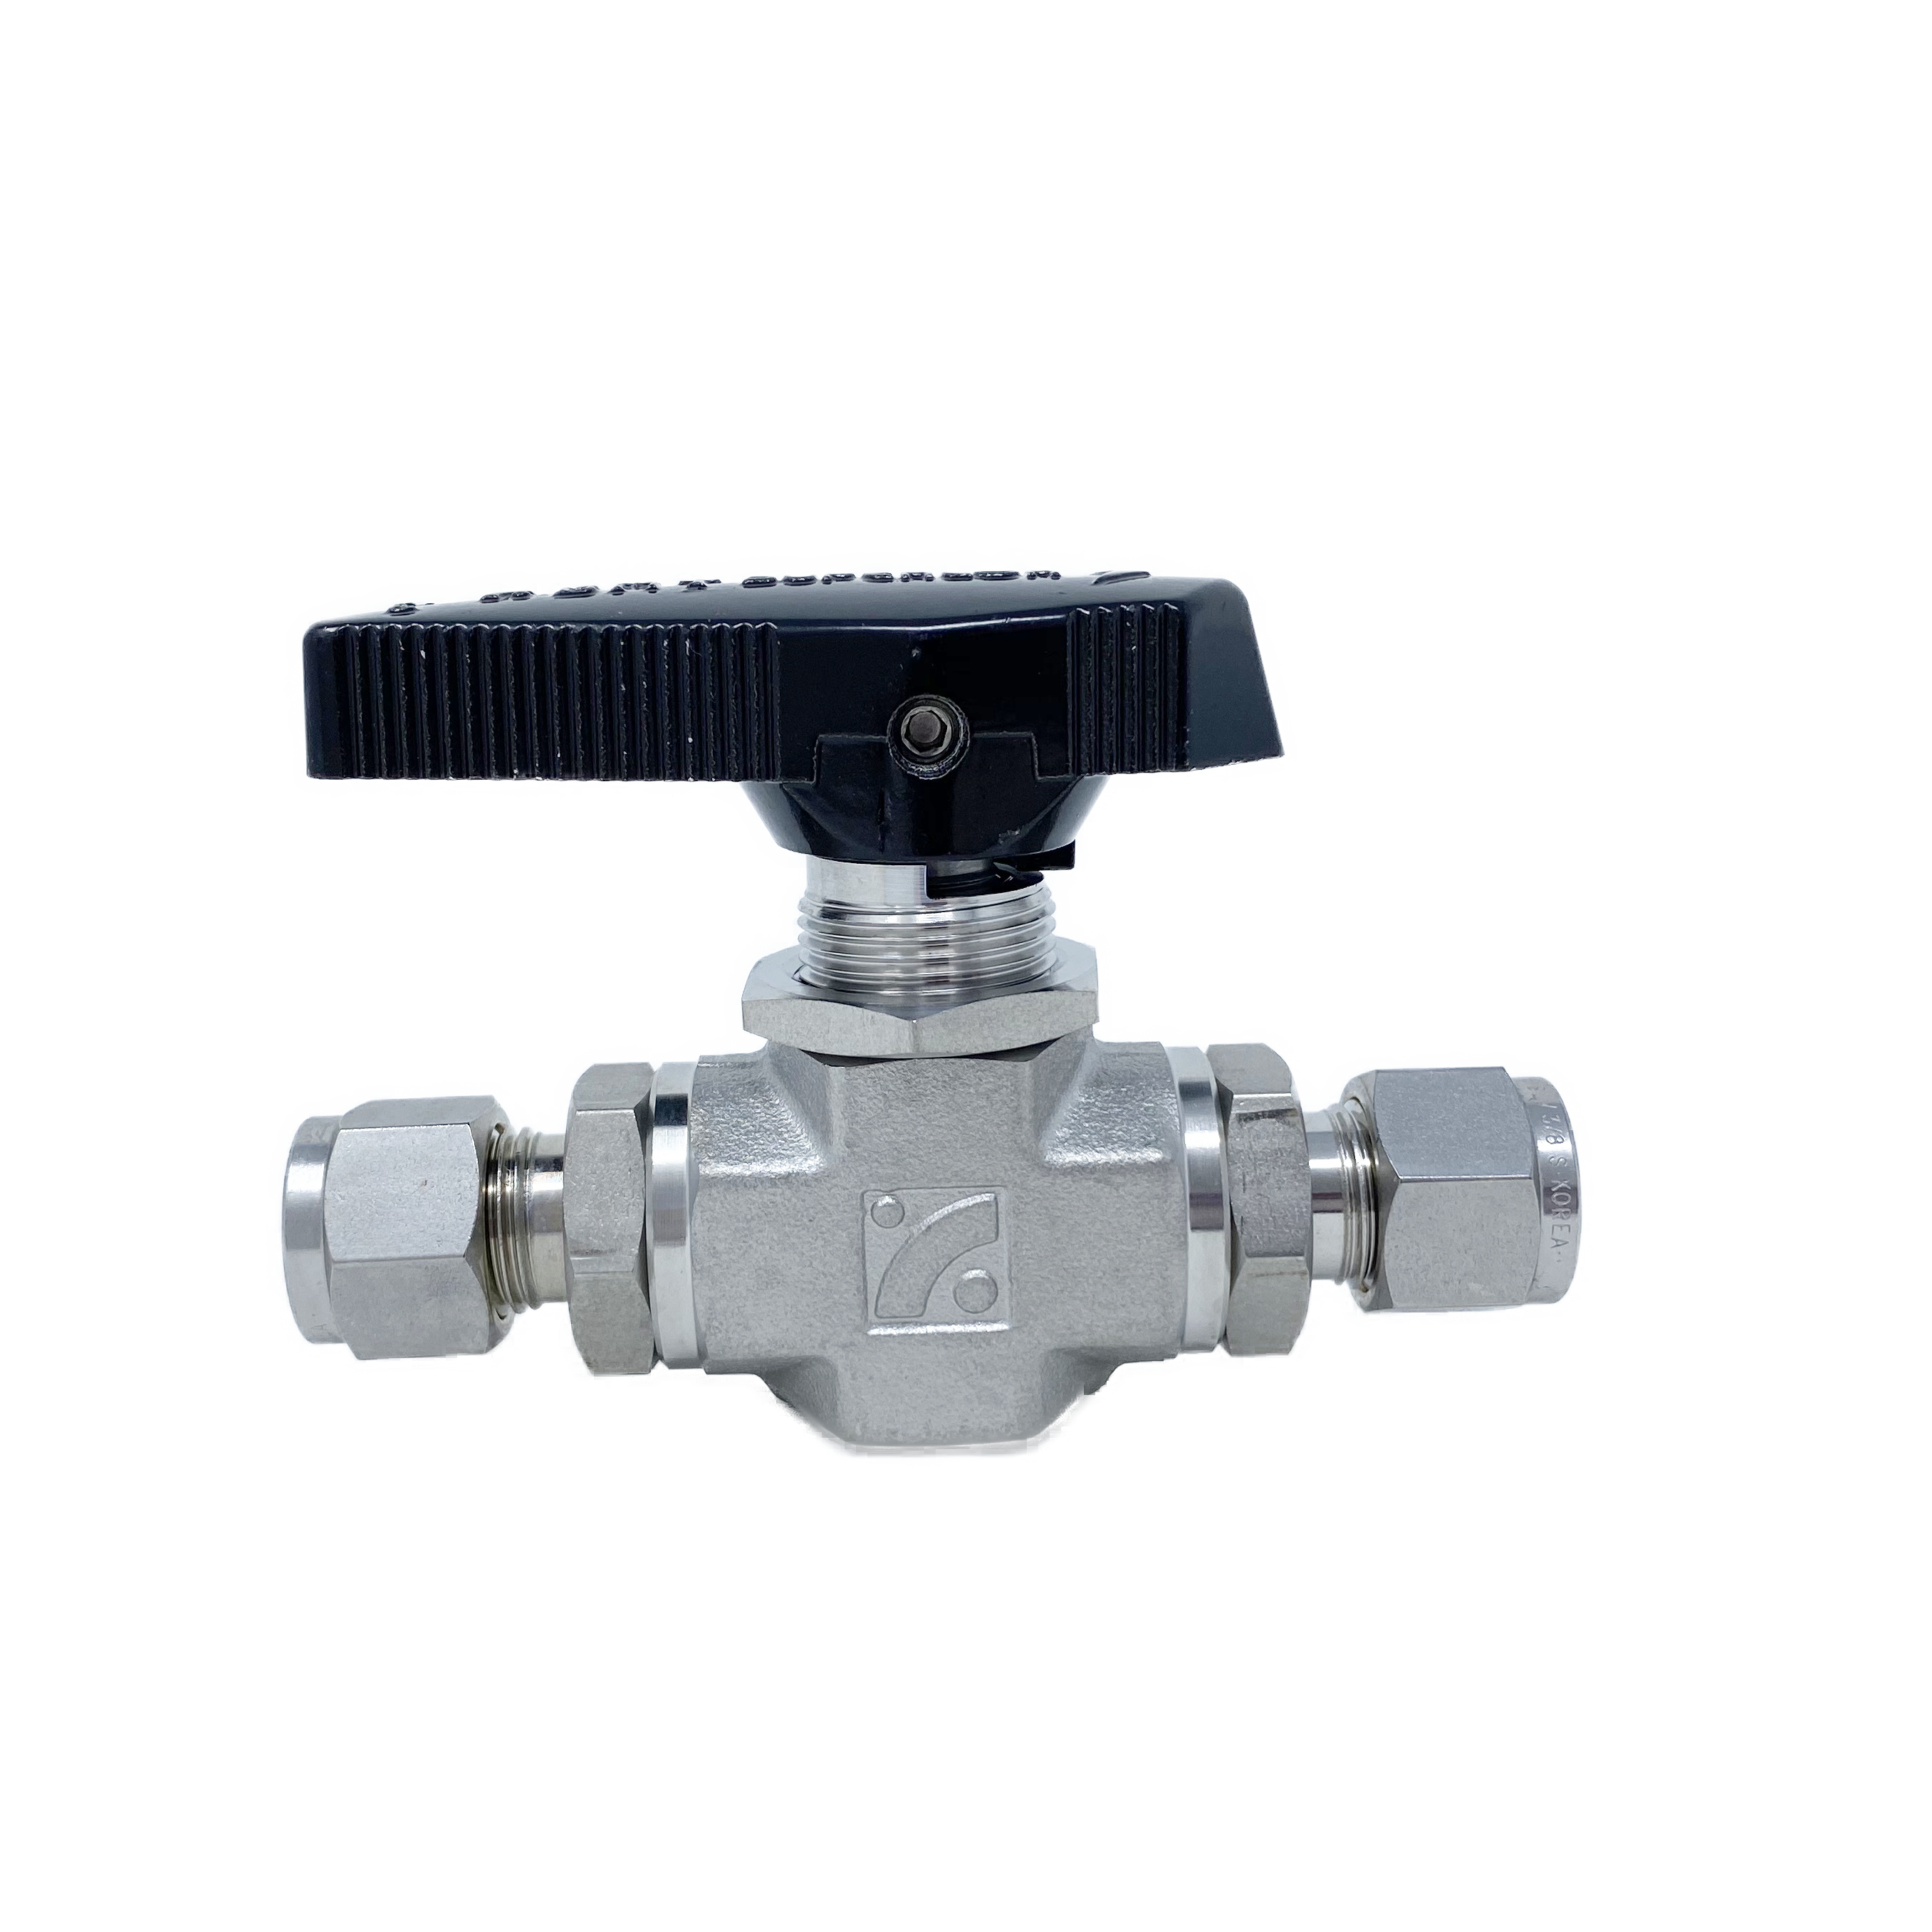 SBVF3602-F-4N-MR : Superlok Ball Valve, Forged High Pressure, 1/4" FNPT, NACE-Rated, 6000psi, 316SS